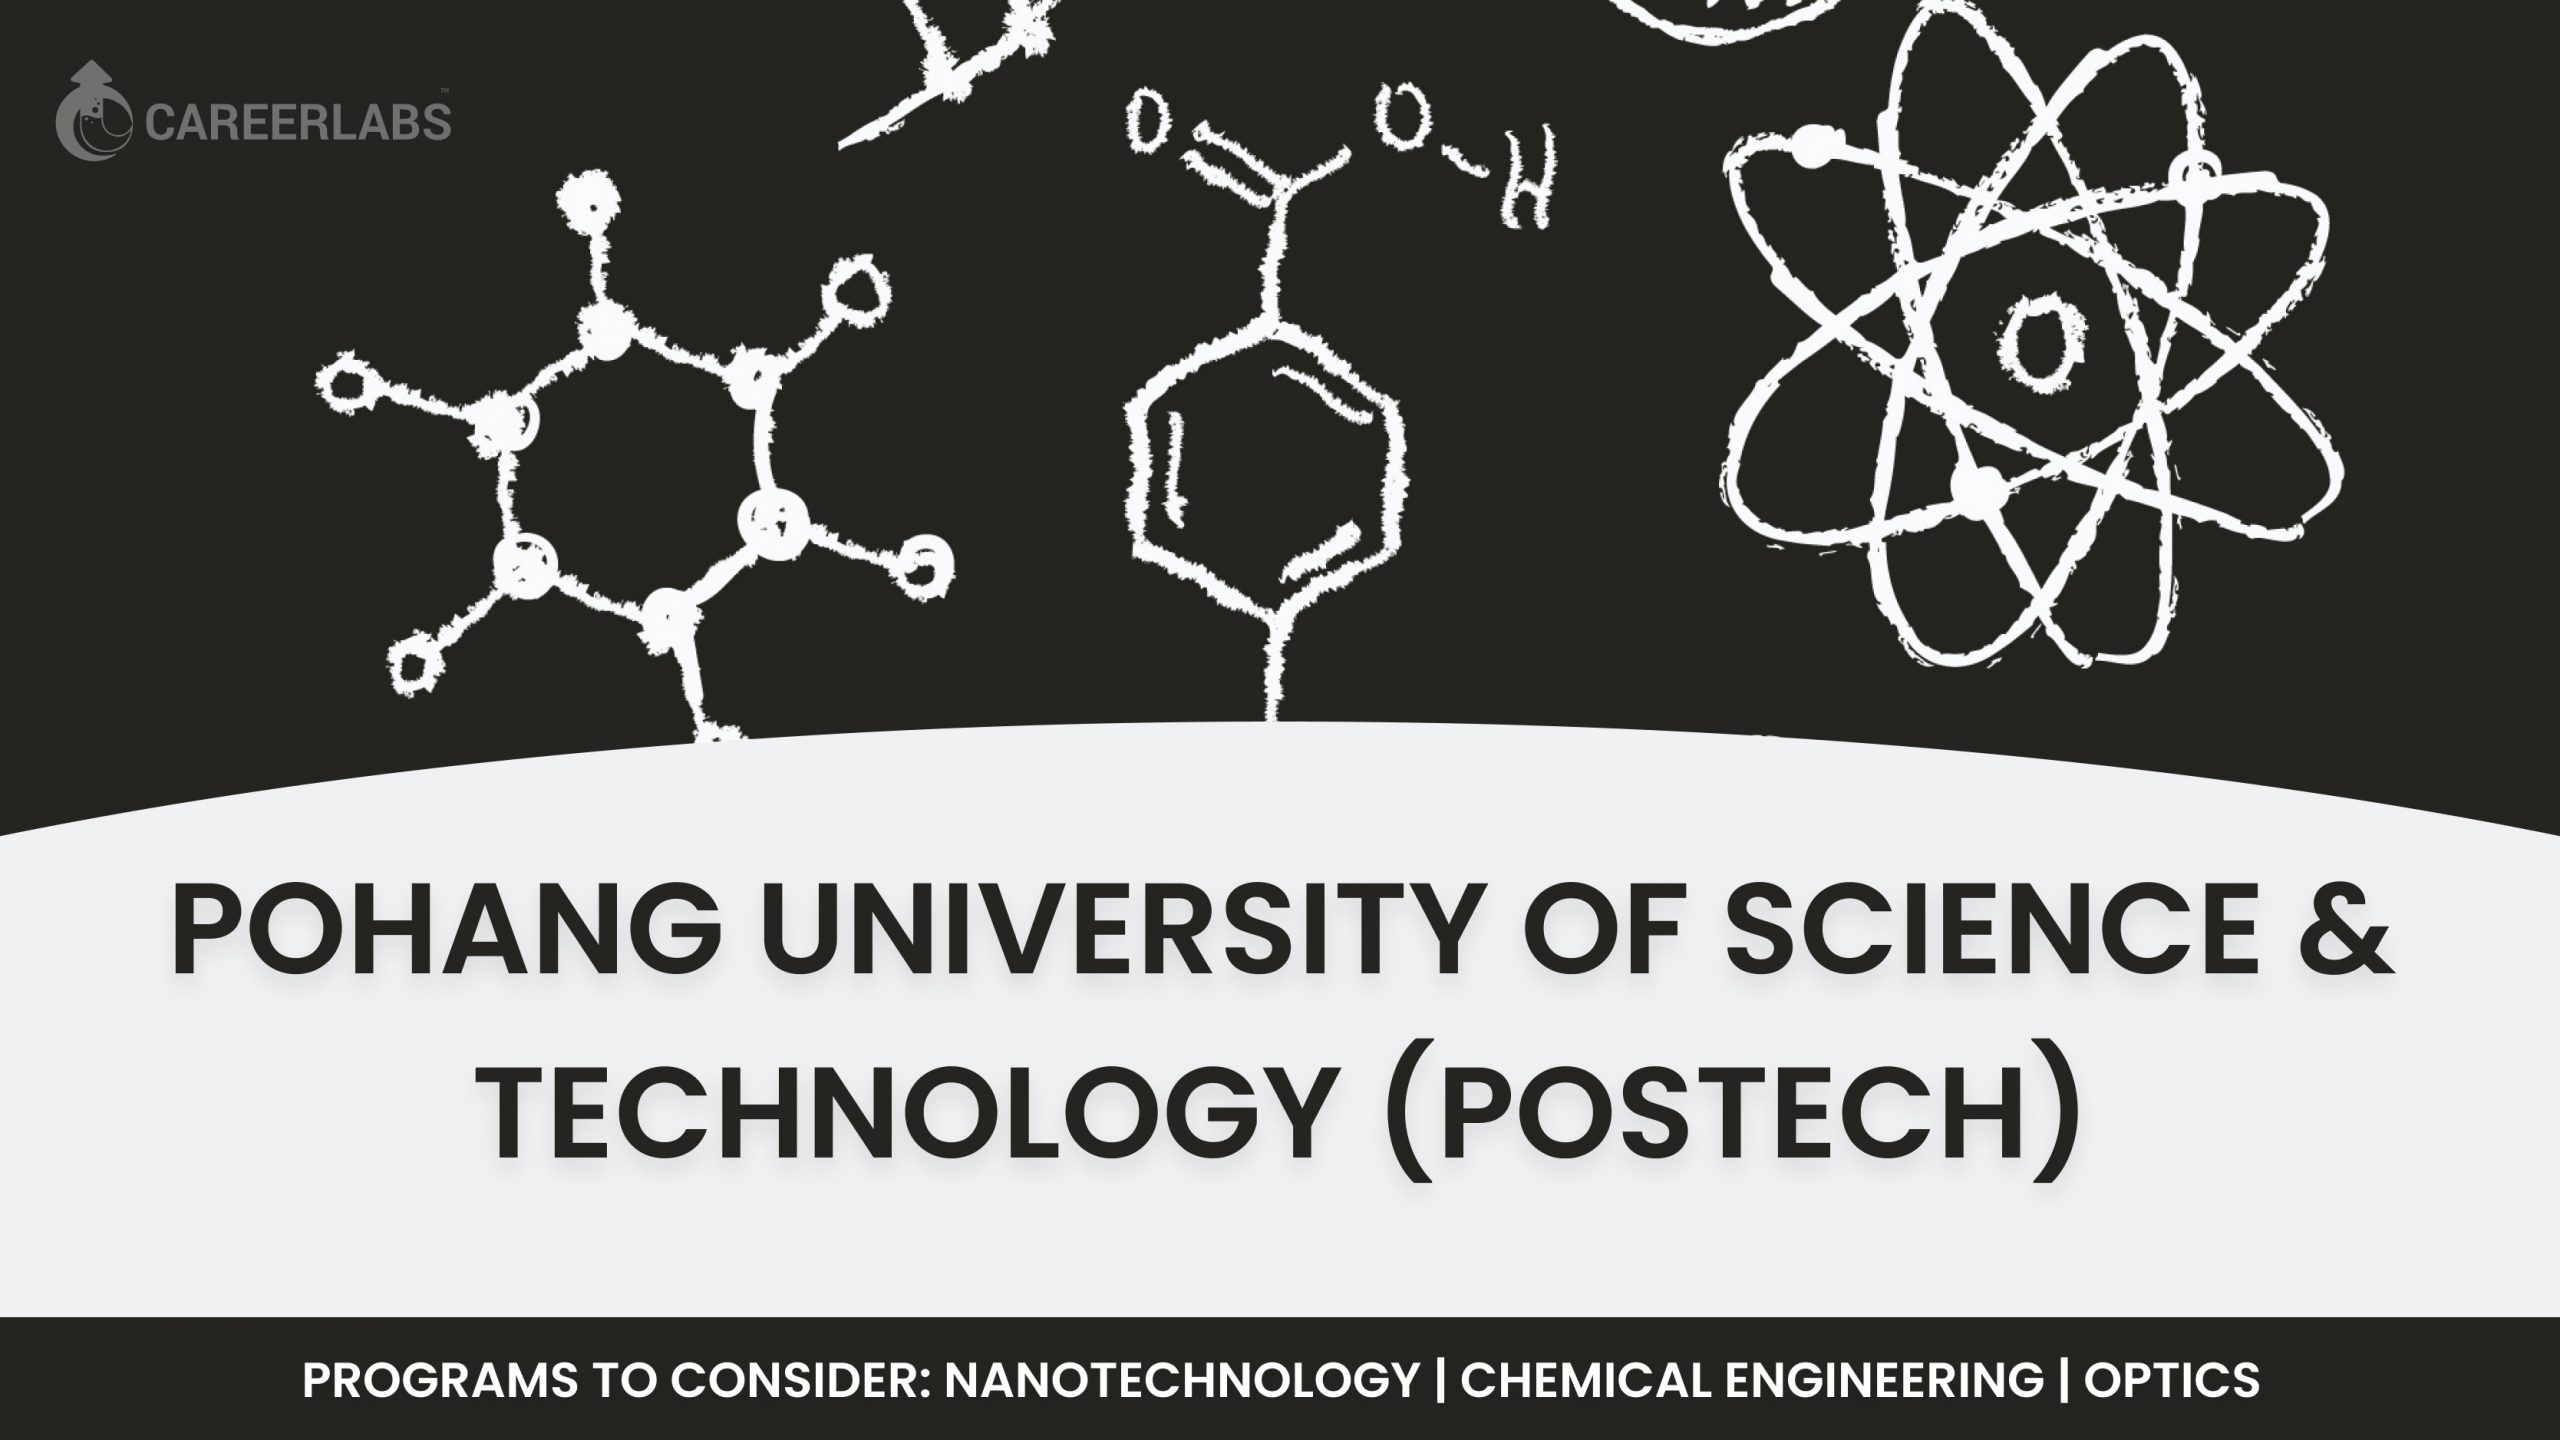 Pohang University of Science and Technology (POSTECH)